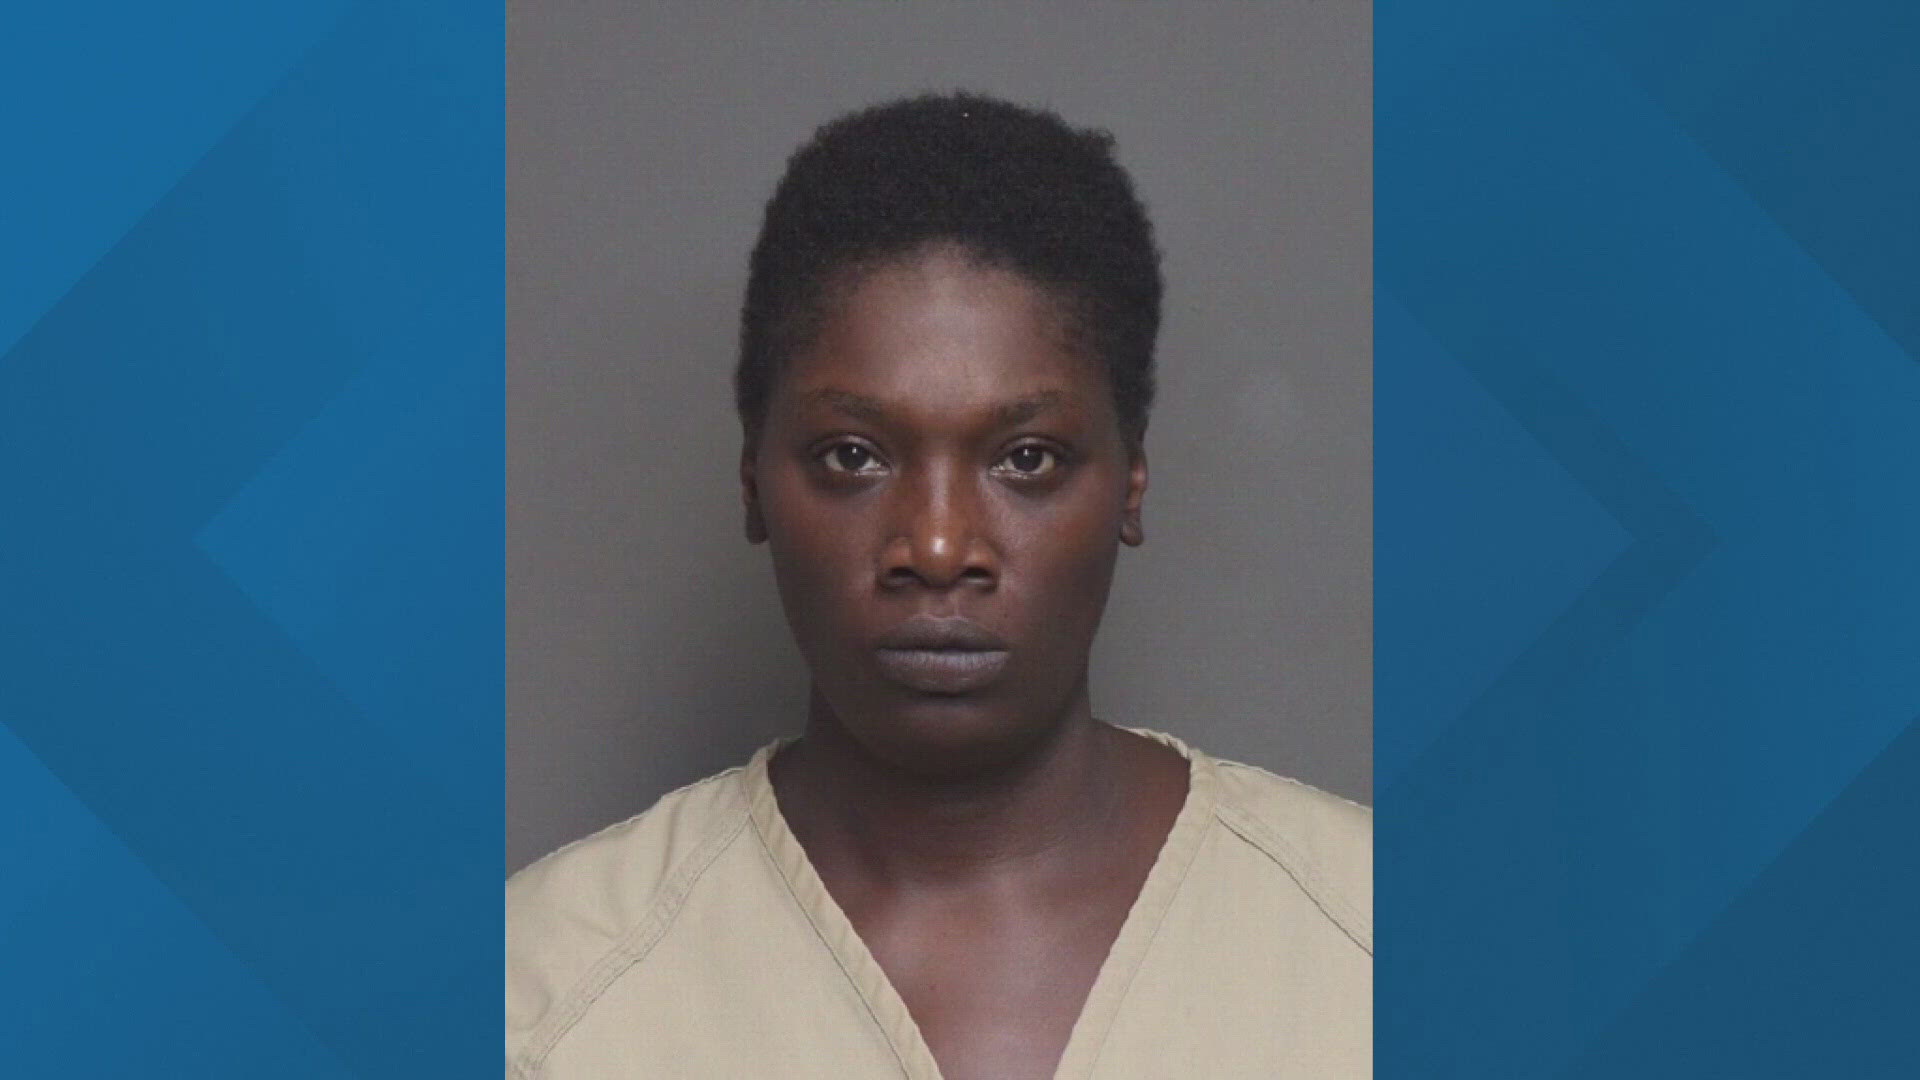 LaShanda Wilder is charged with murder in her 8-year-old son's death.